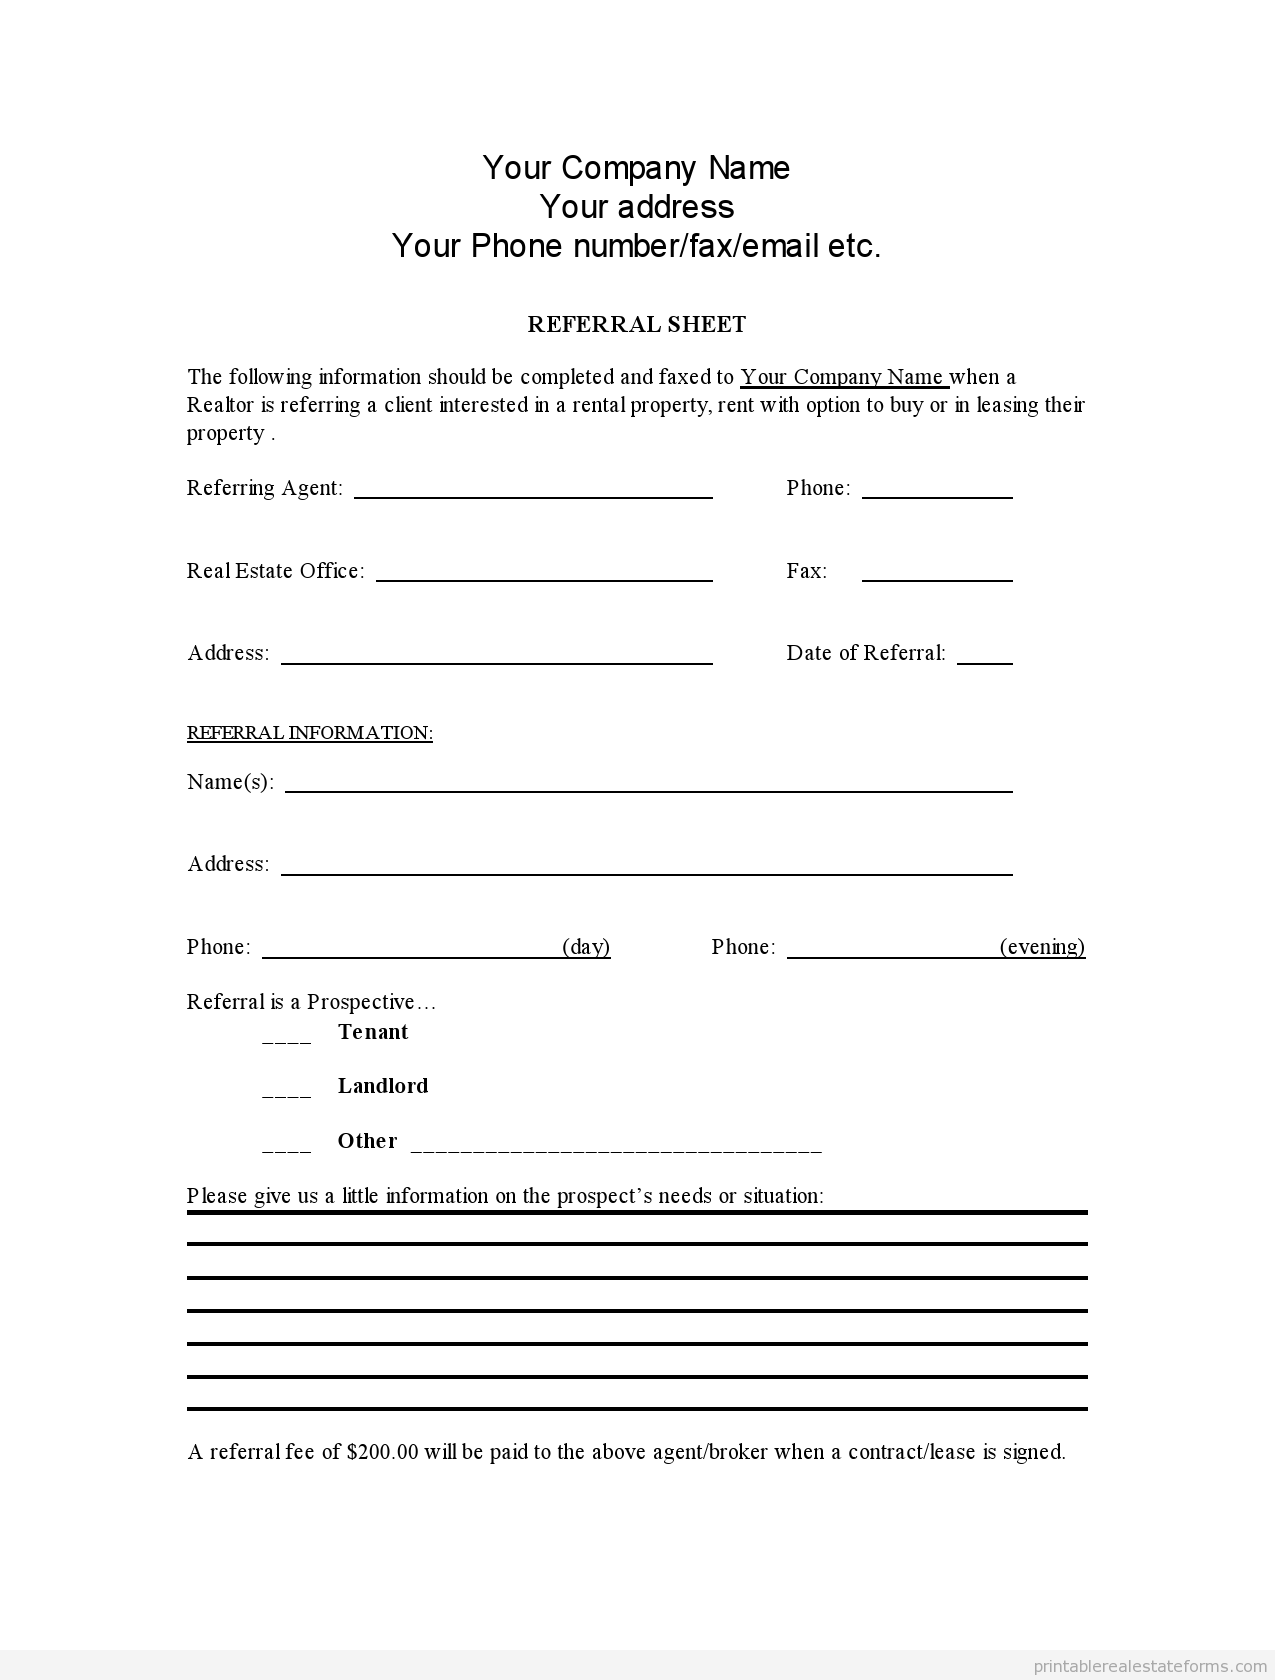 Sales Referral Form Template | | Mt Home Arts